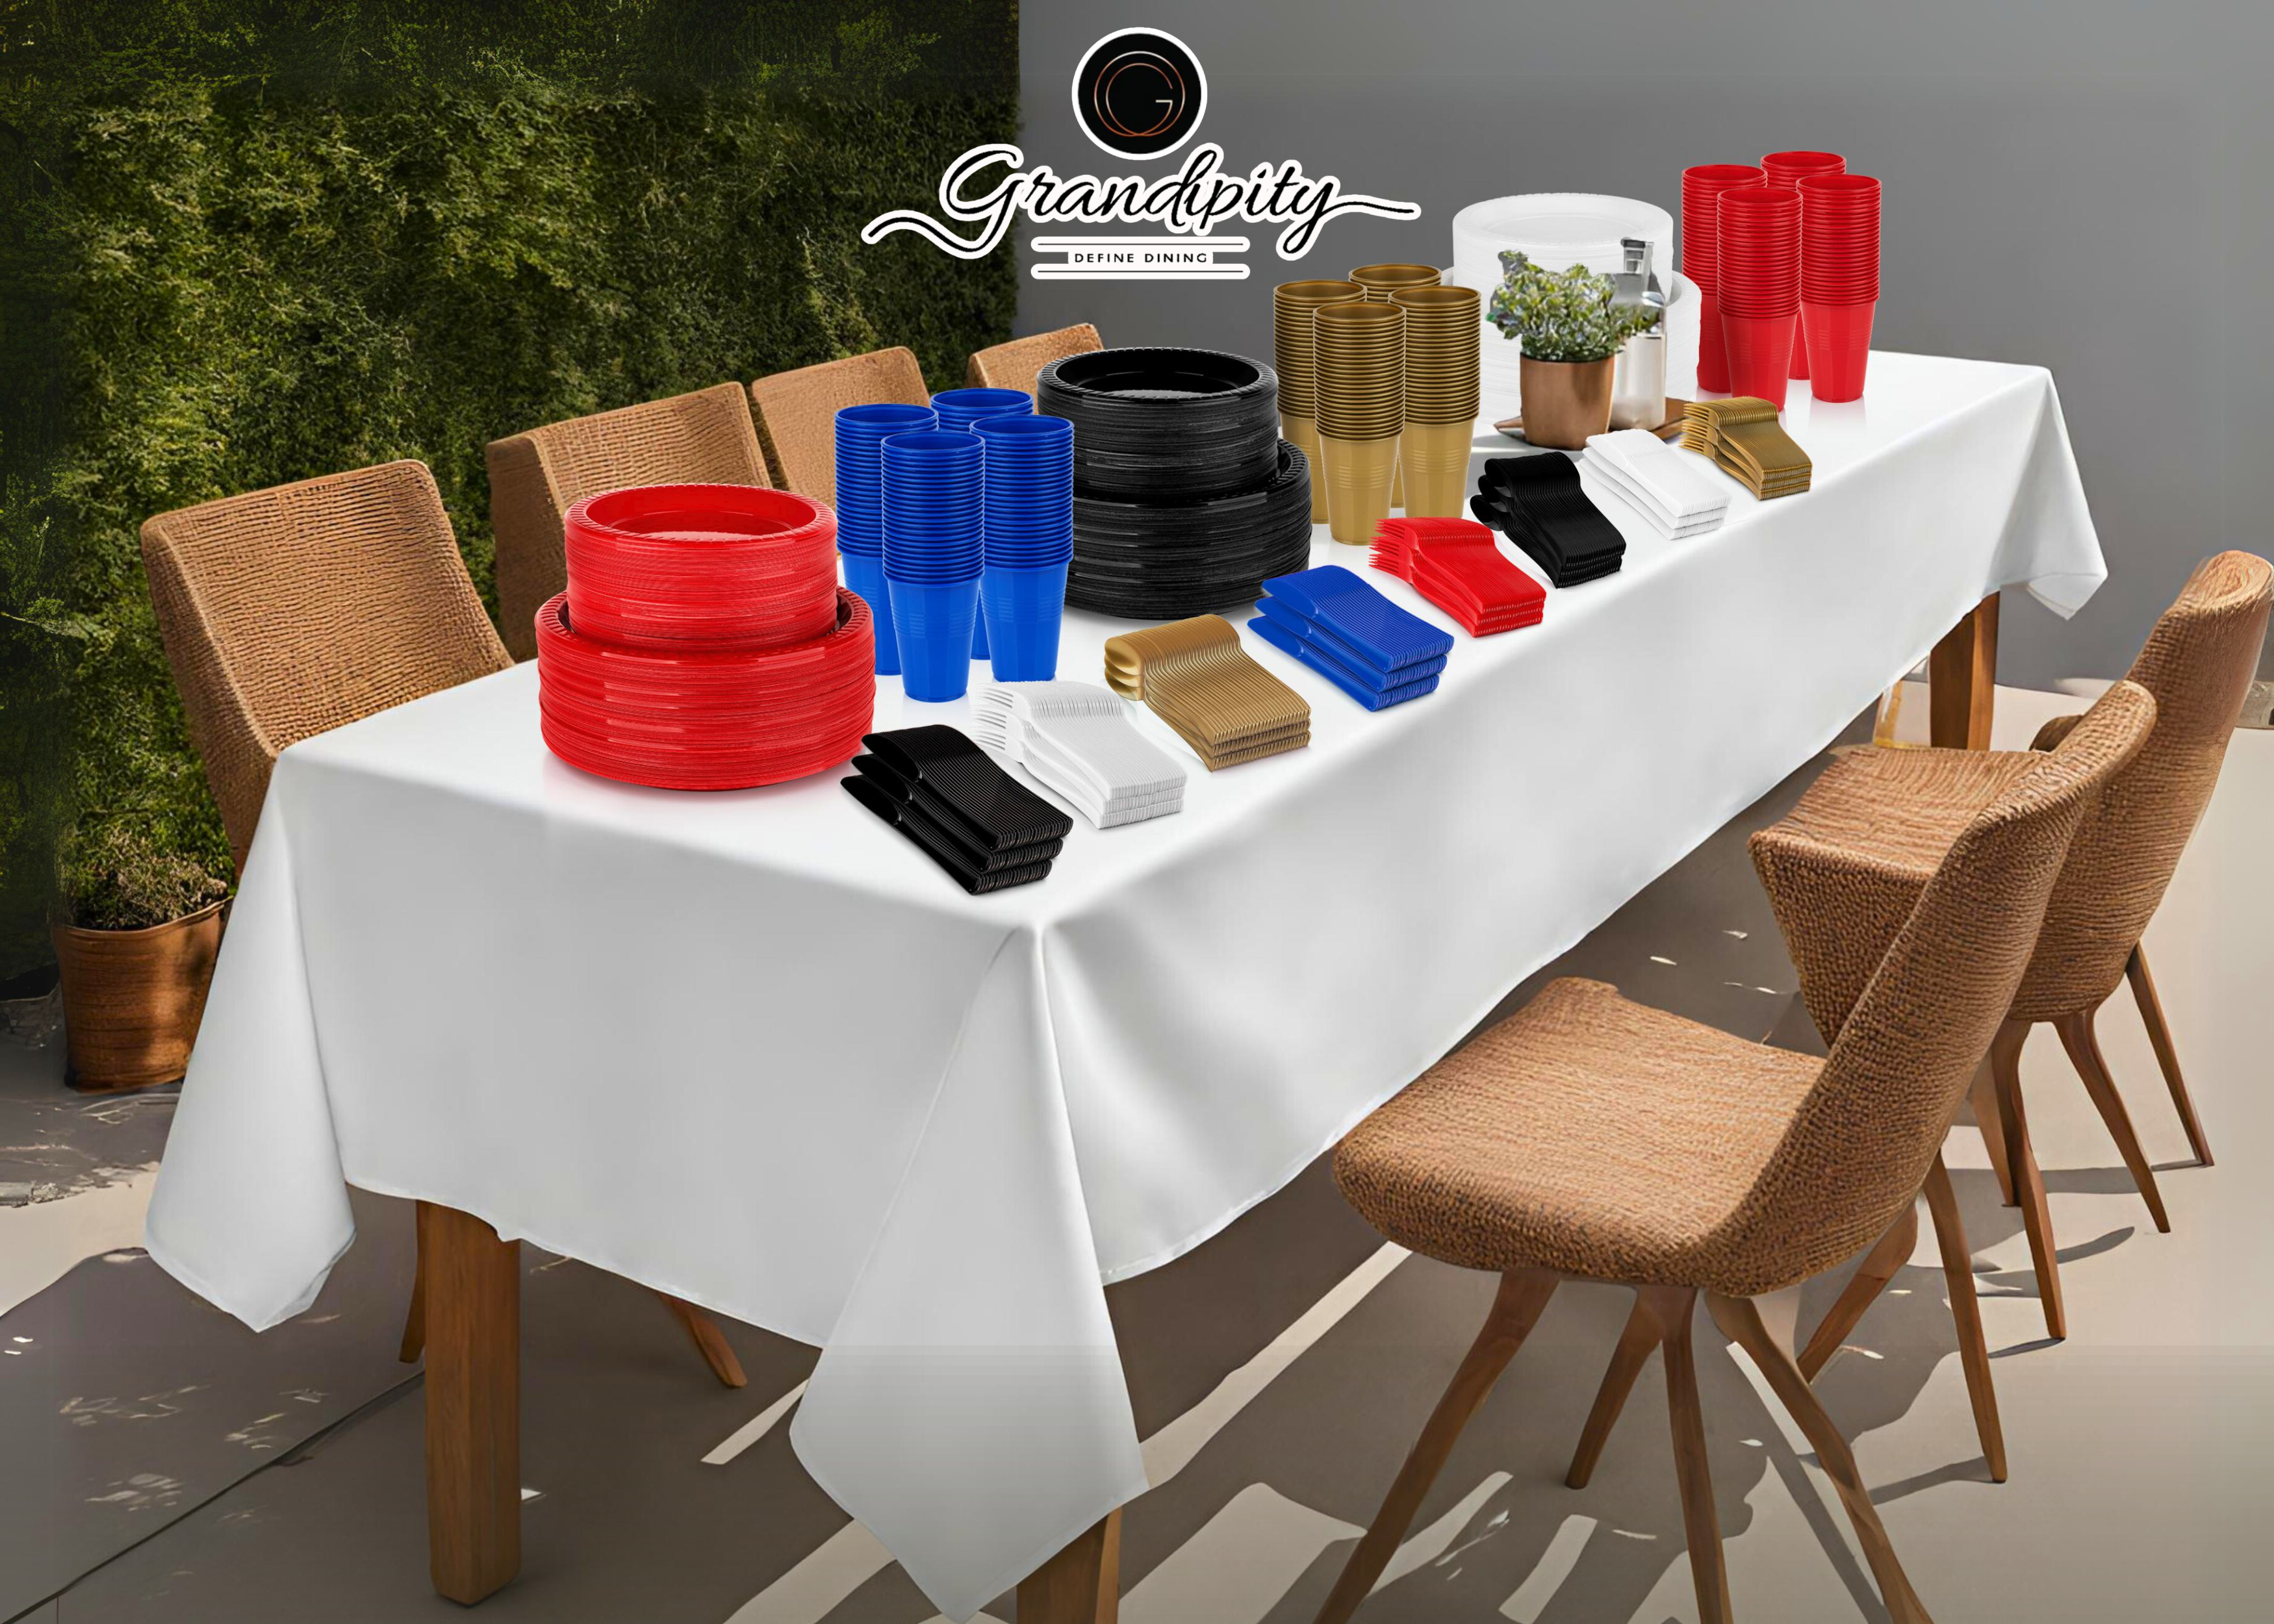 Tablecloth and disposable dinnerware set